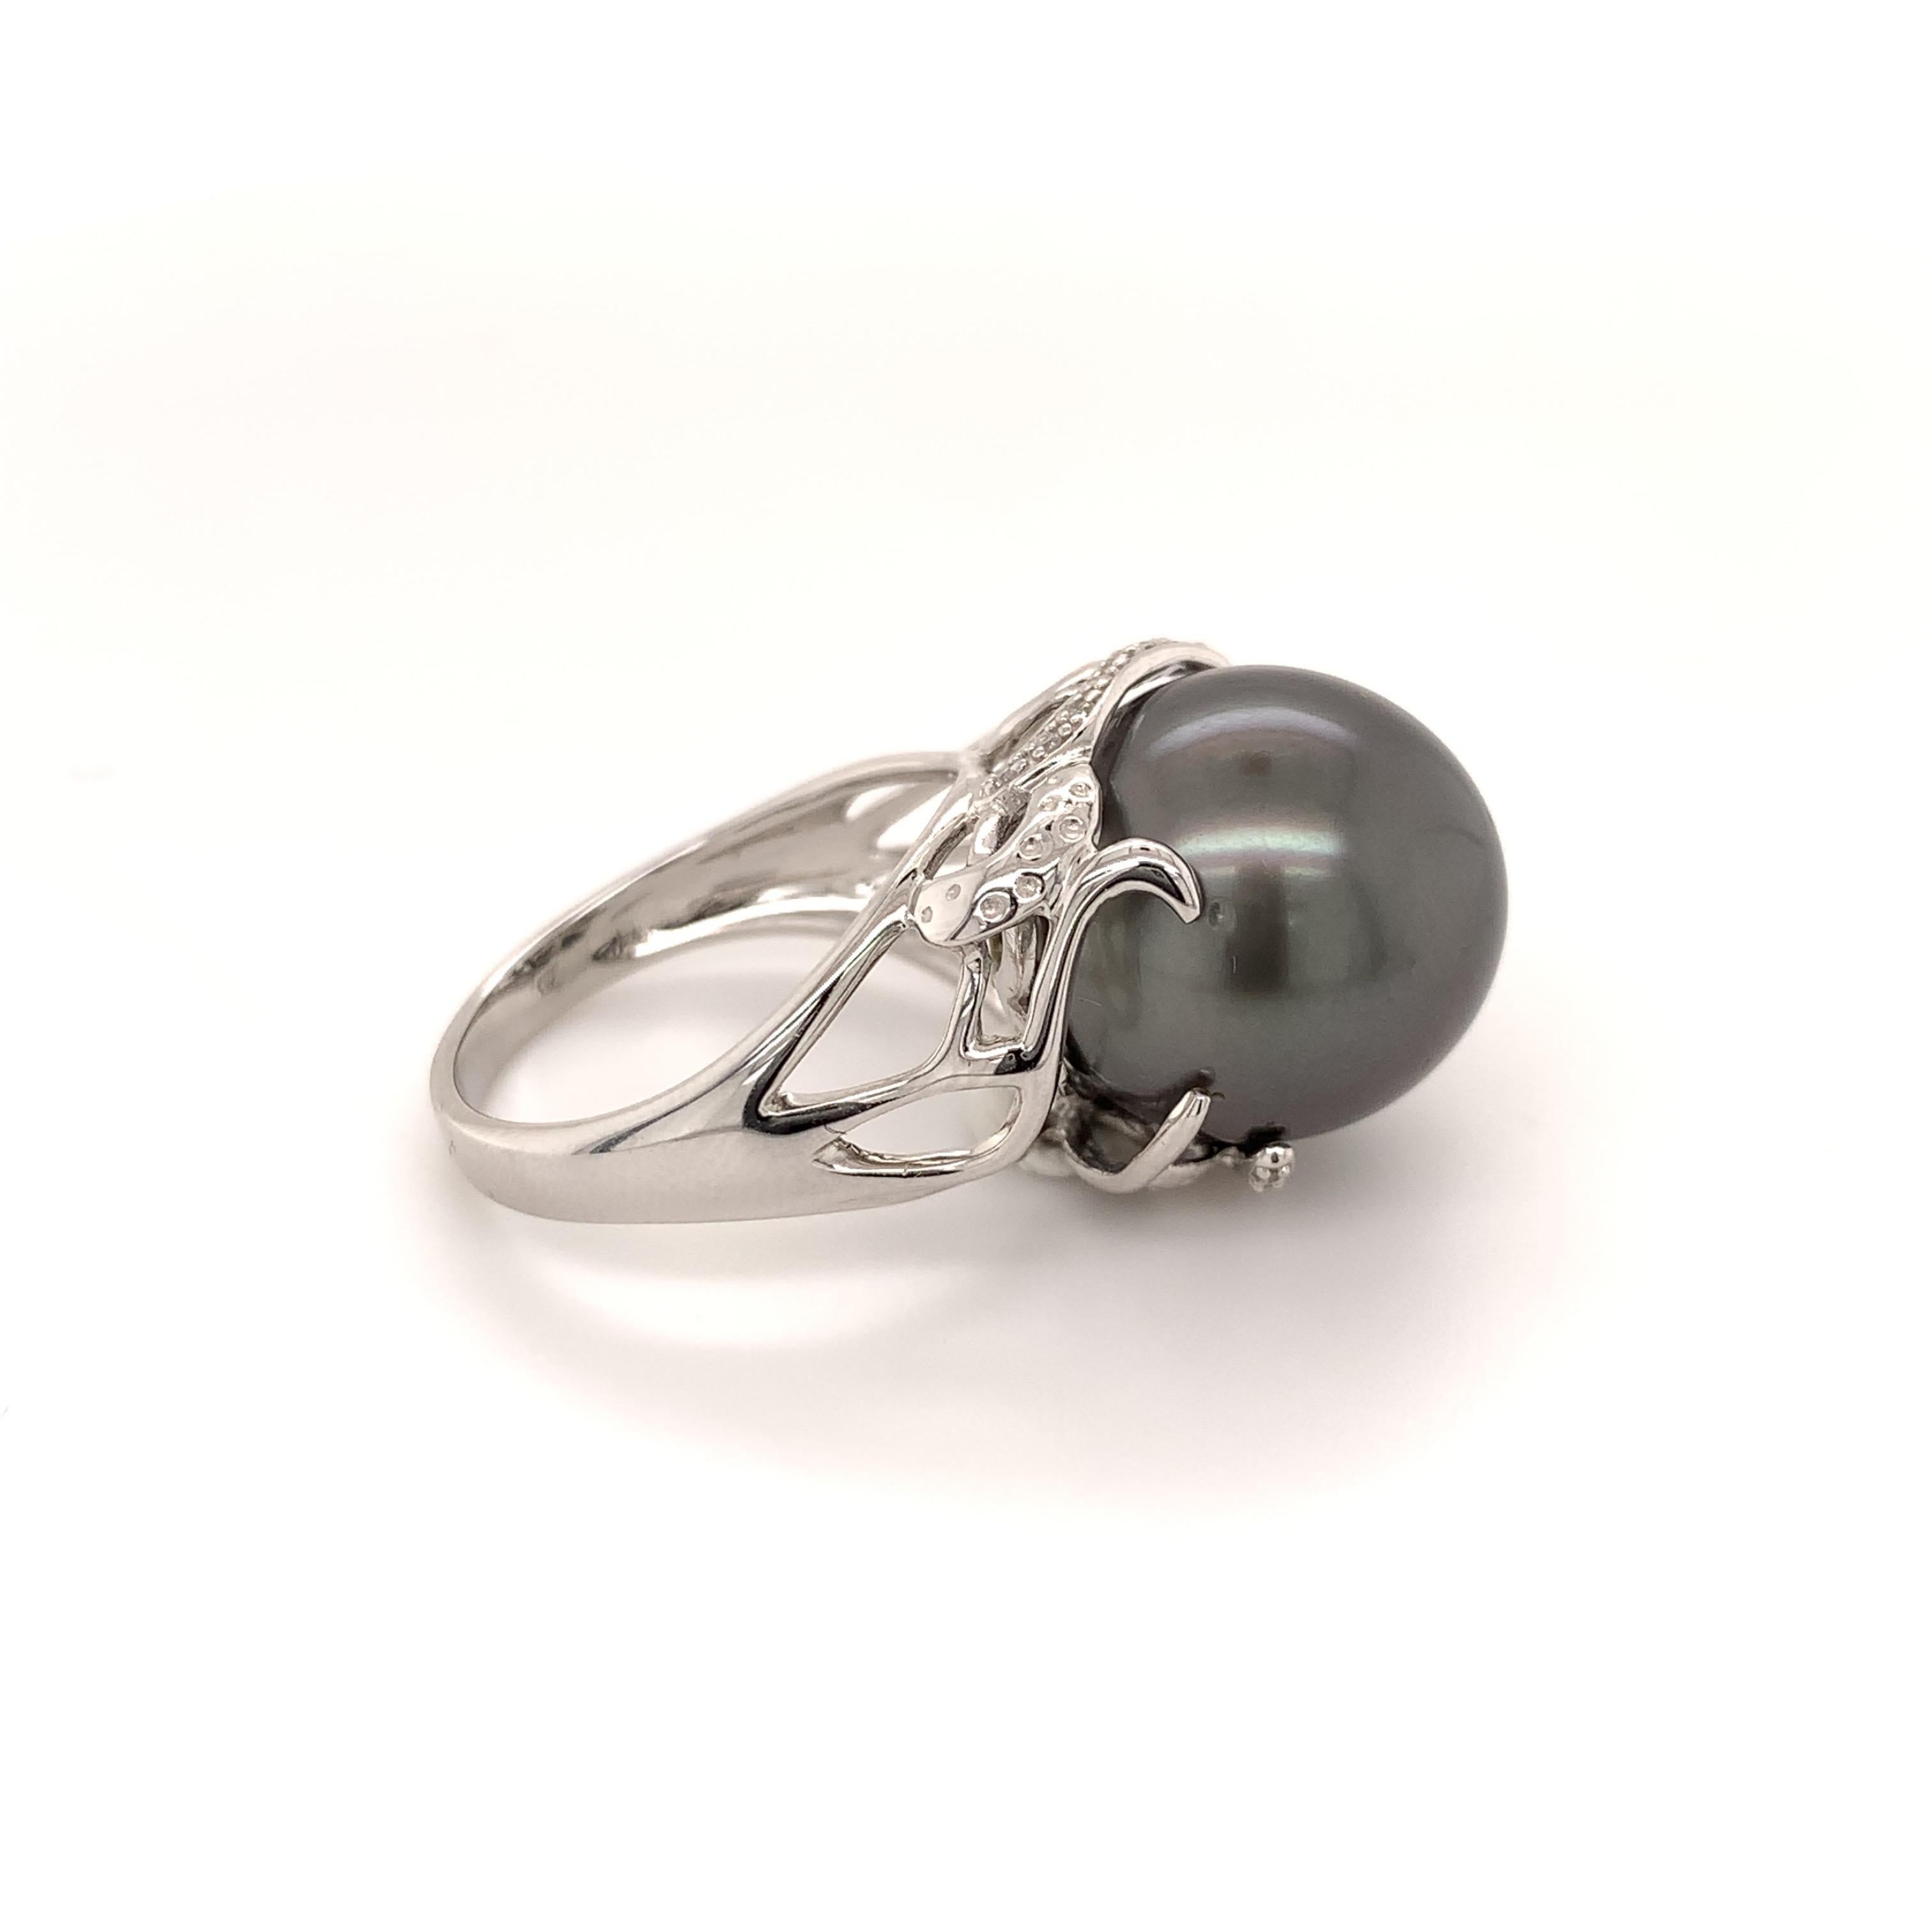 Stunning Tahitian pearl cocktail ring. Good luster, round 14.4mm Tahitian pearl, black with rose' overtone accented with round brilliant cut diamonds. Handcrafted design set in high polished 14 karats white gold.

Pearl: 14.4mm, good luster, round,